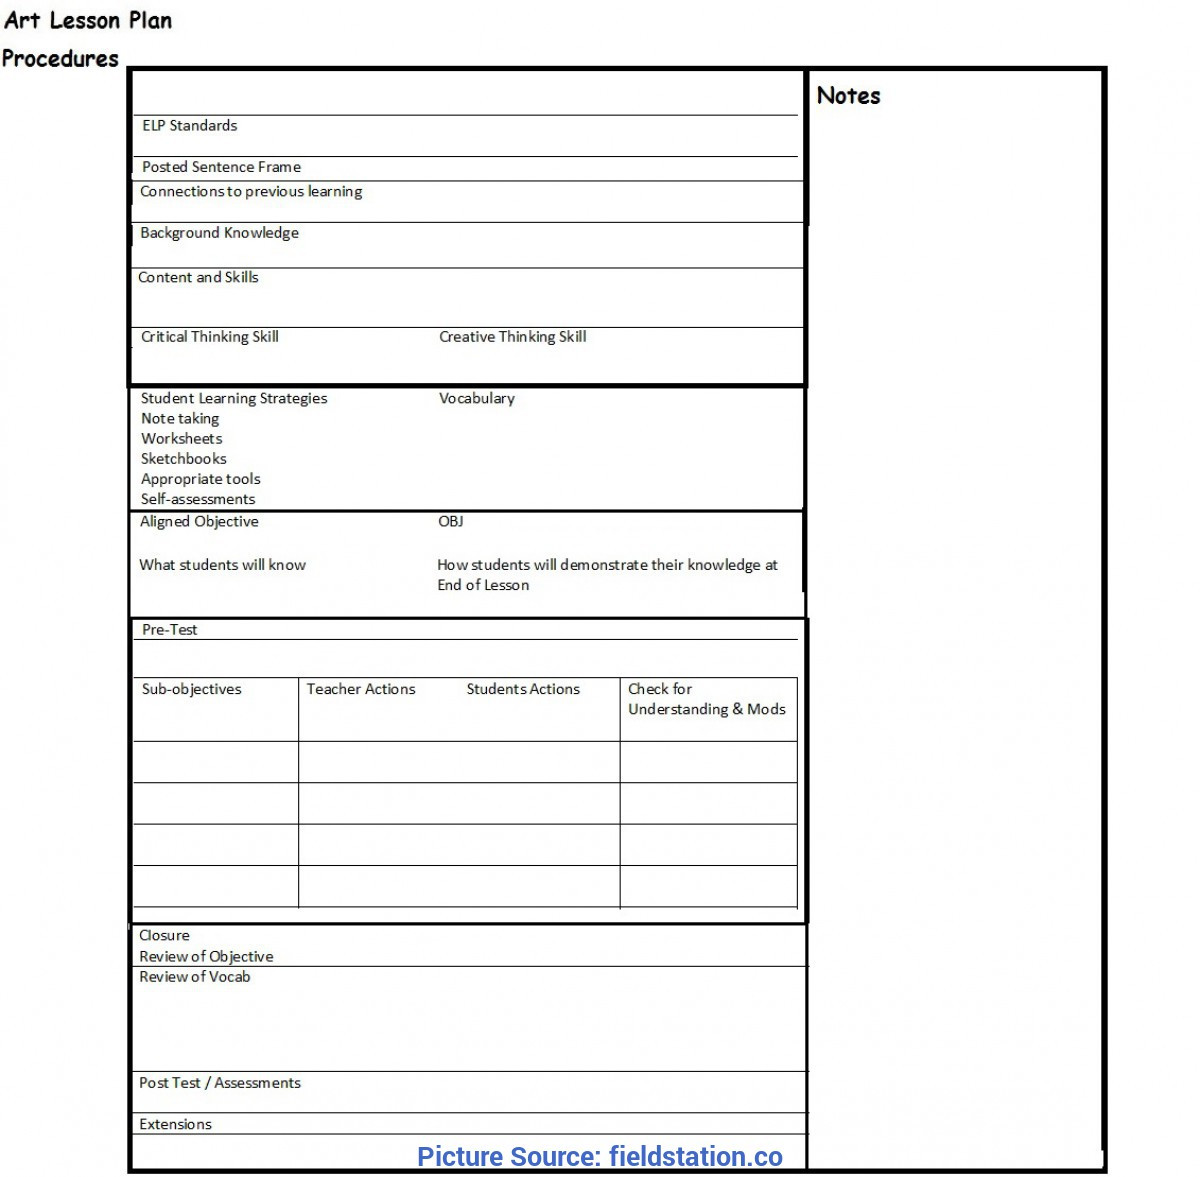 Weekly Lesson Plan Template Elementary Excellent Weekly Lesson Plan Templates for Elementary